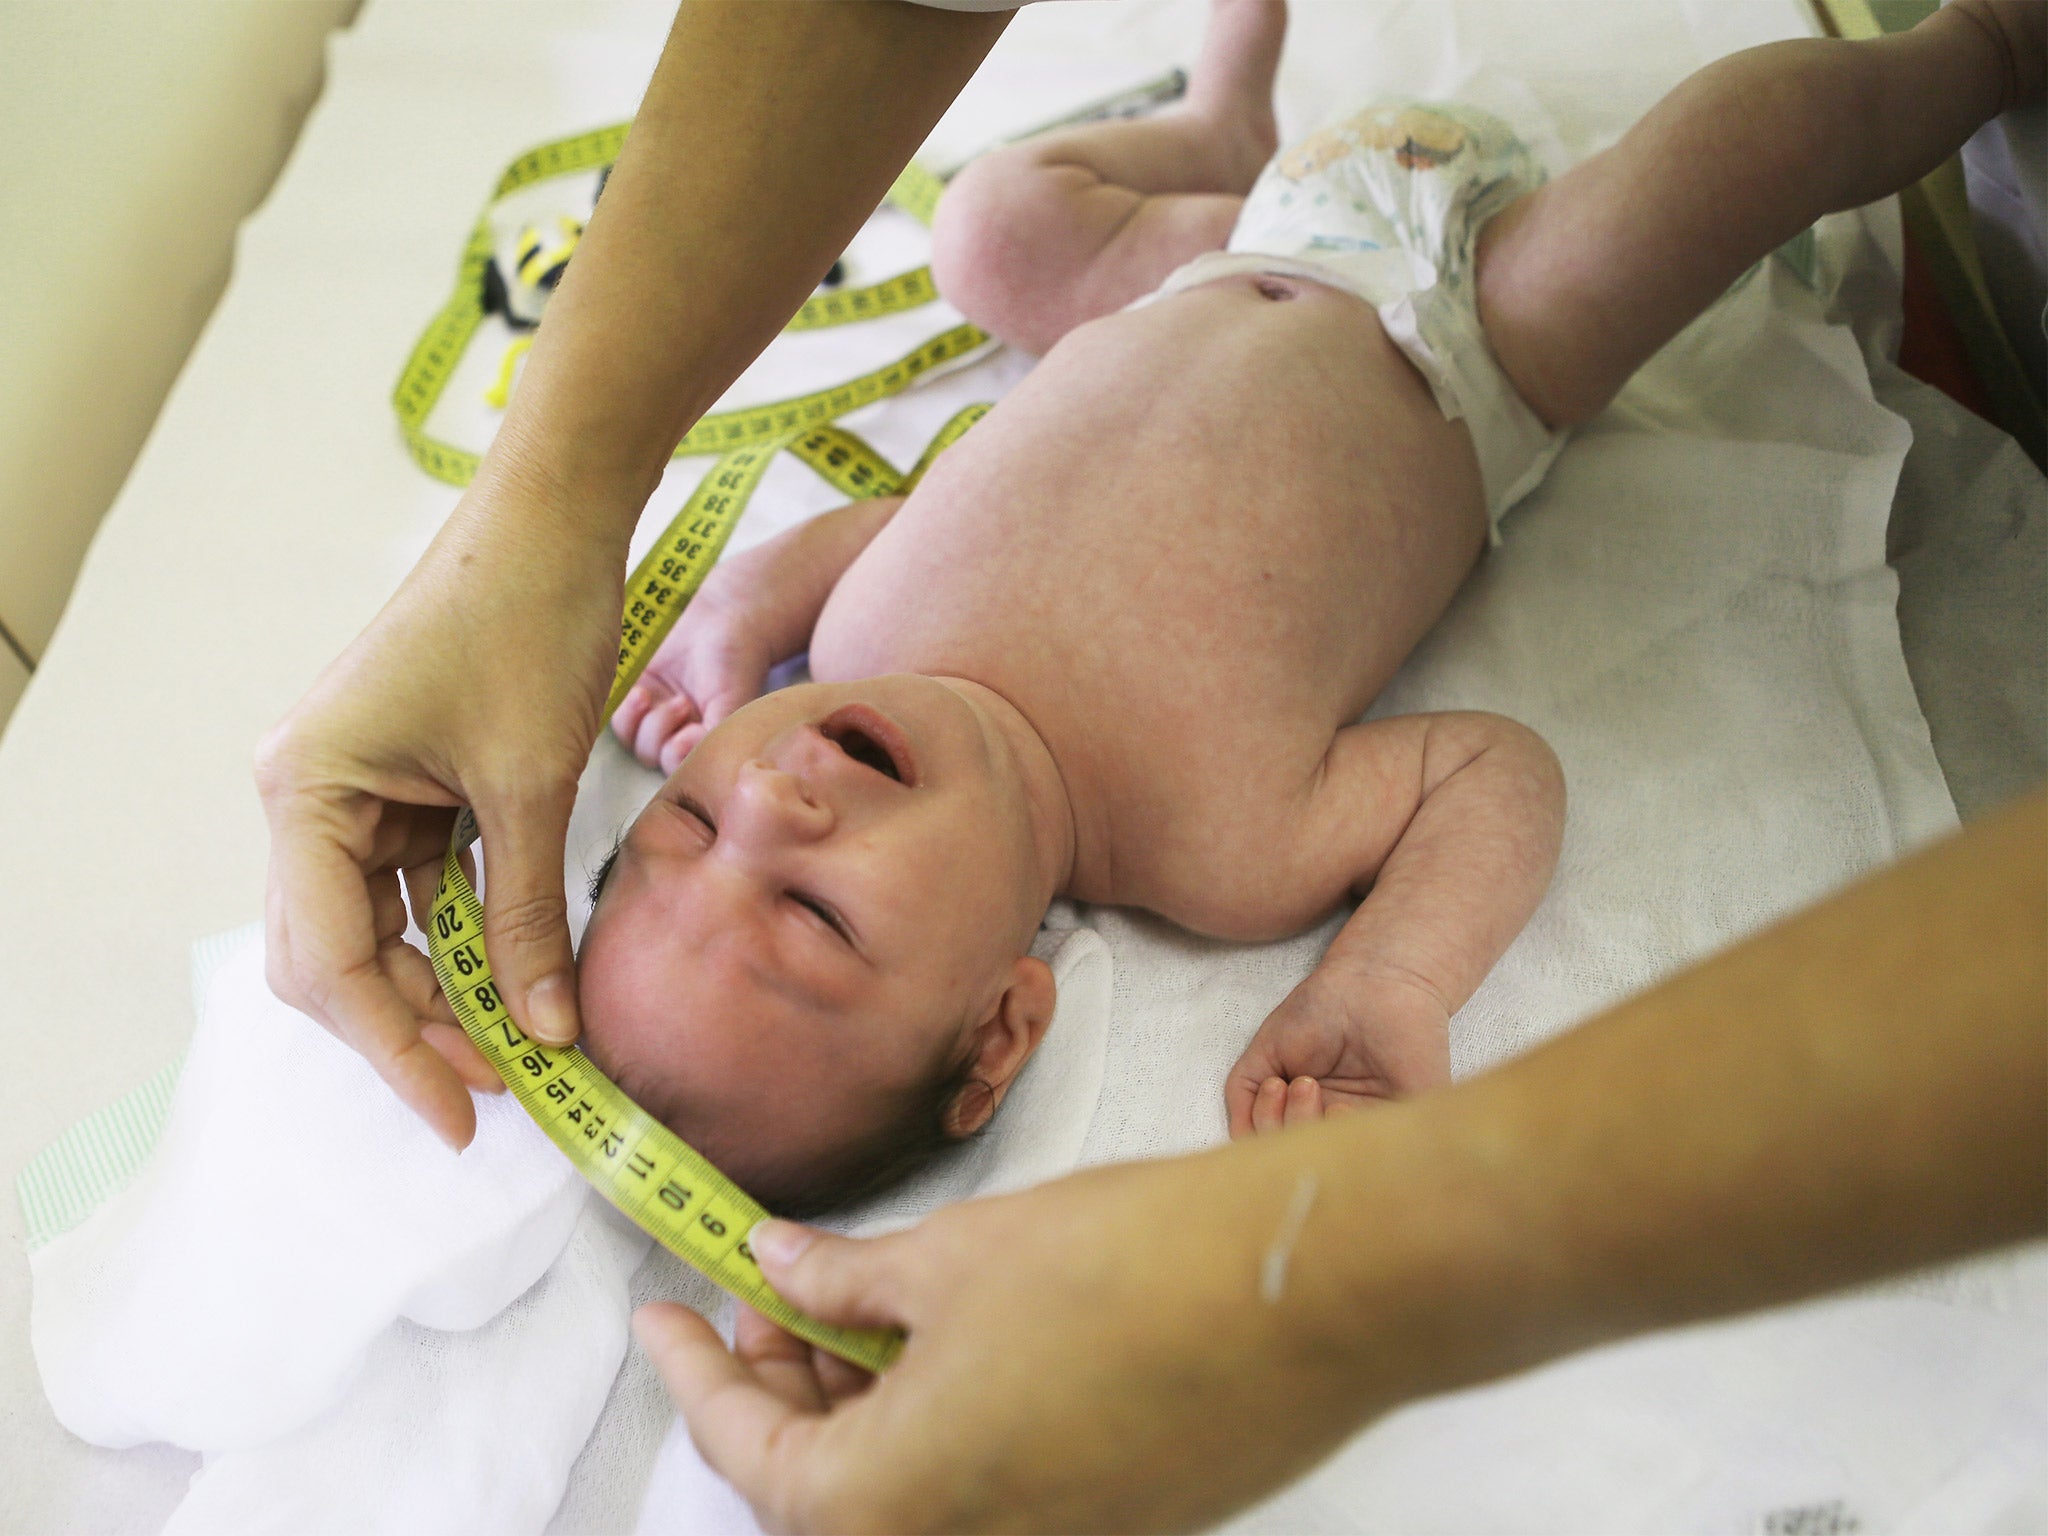 A doctor measures the head of a baby with microcephaly in Brazil